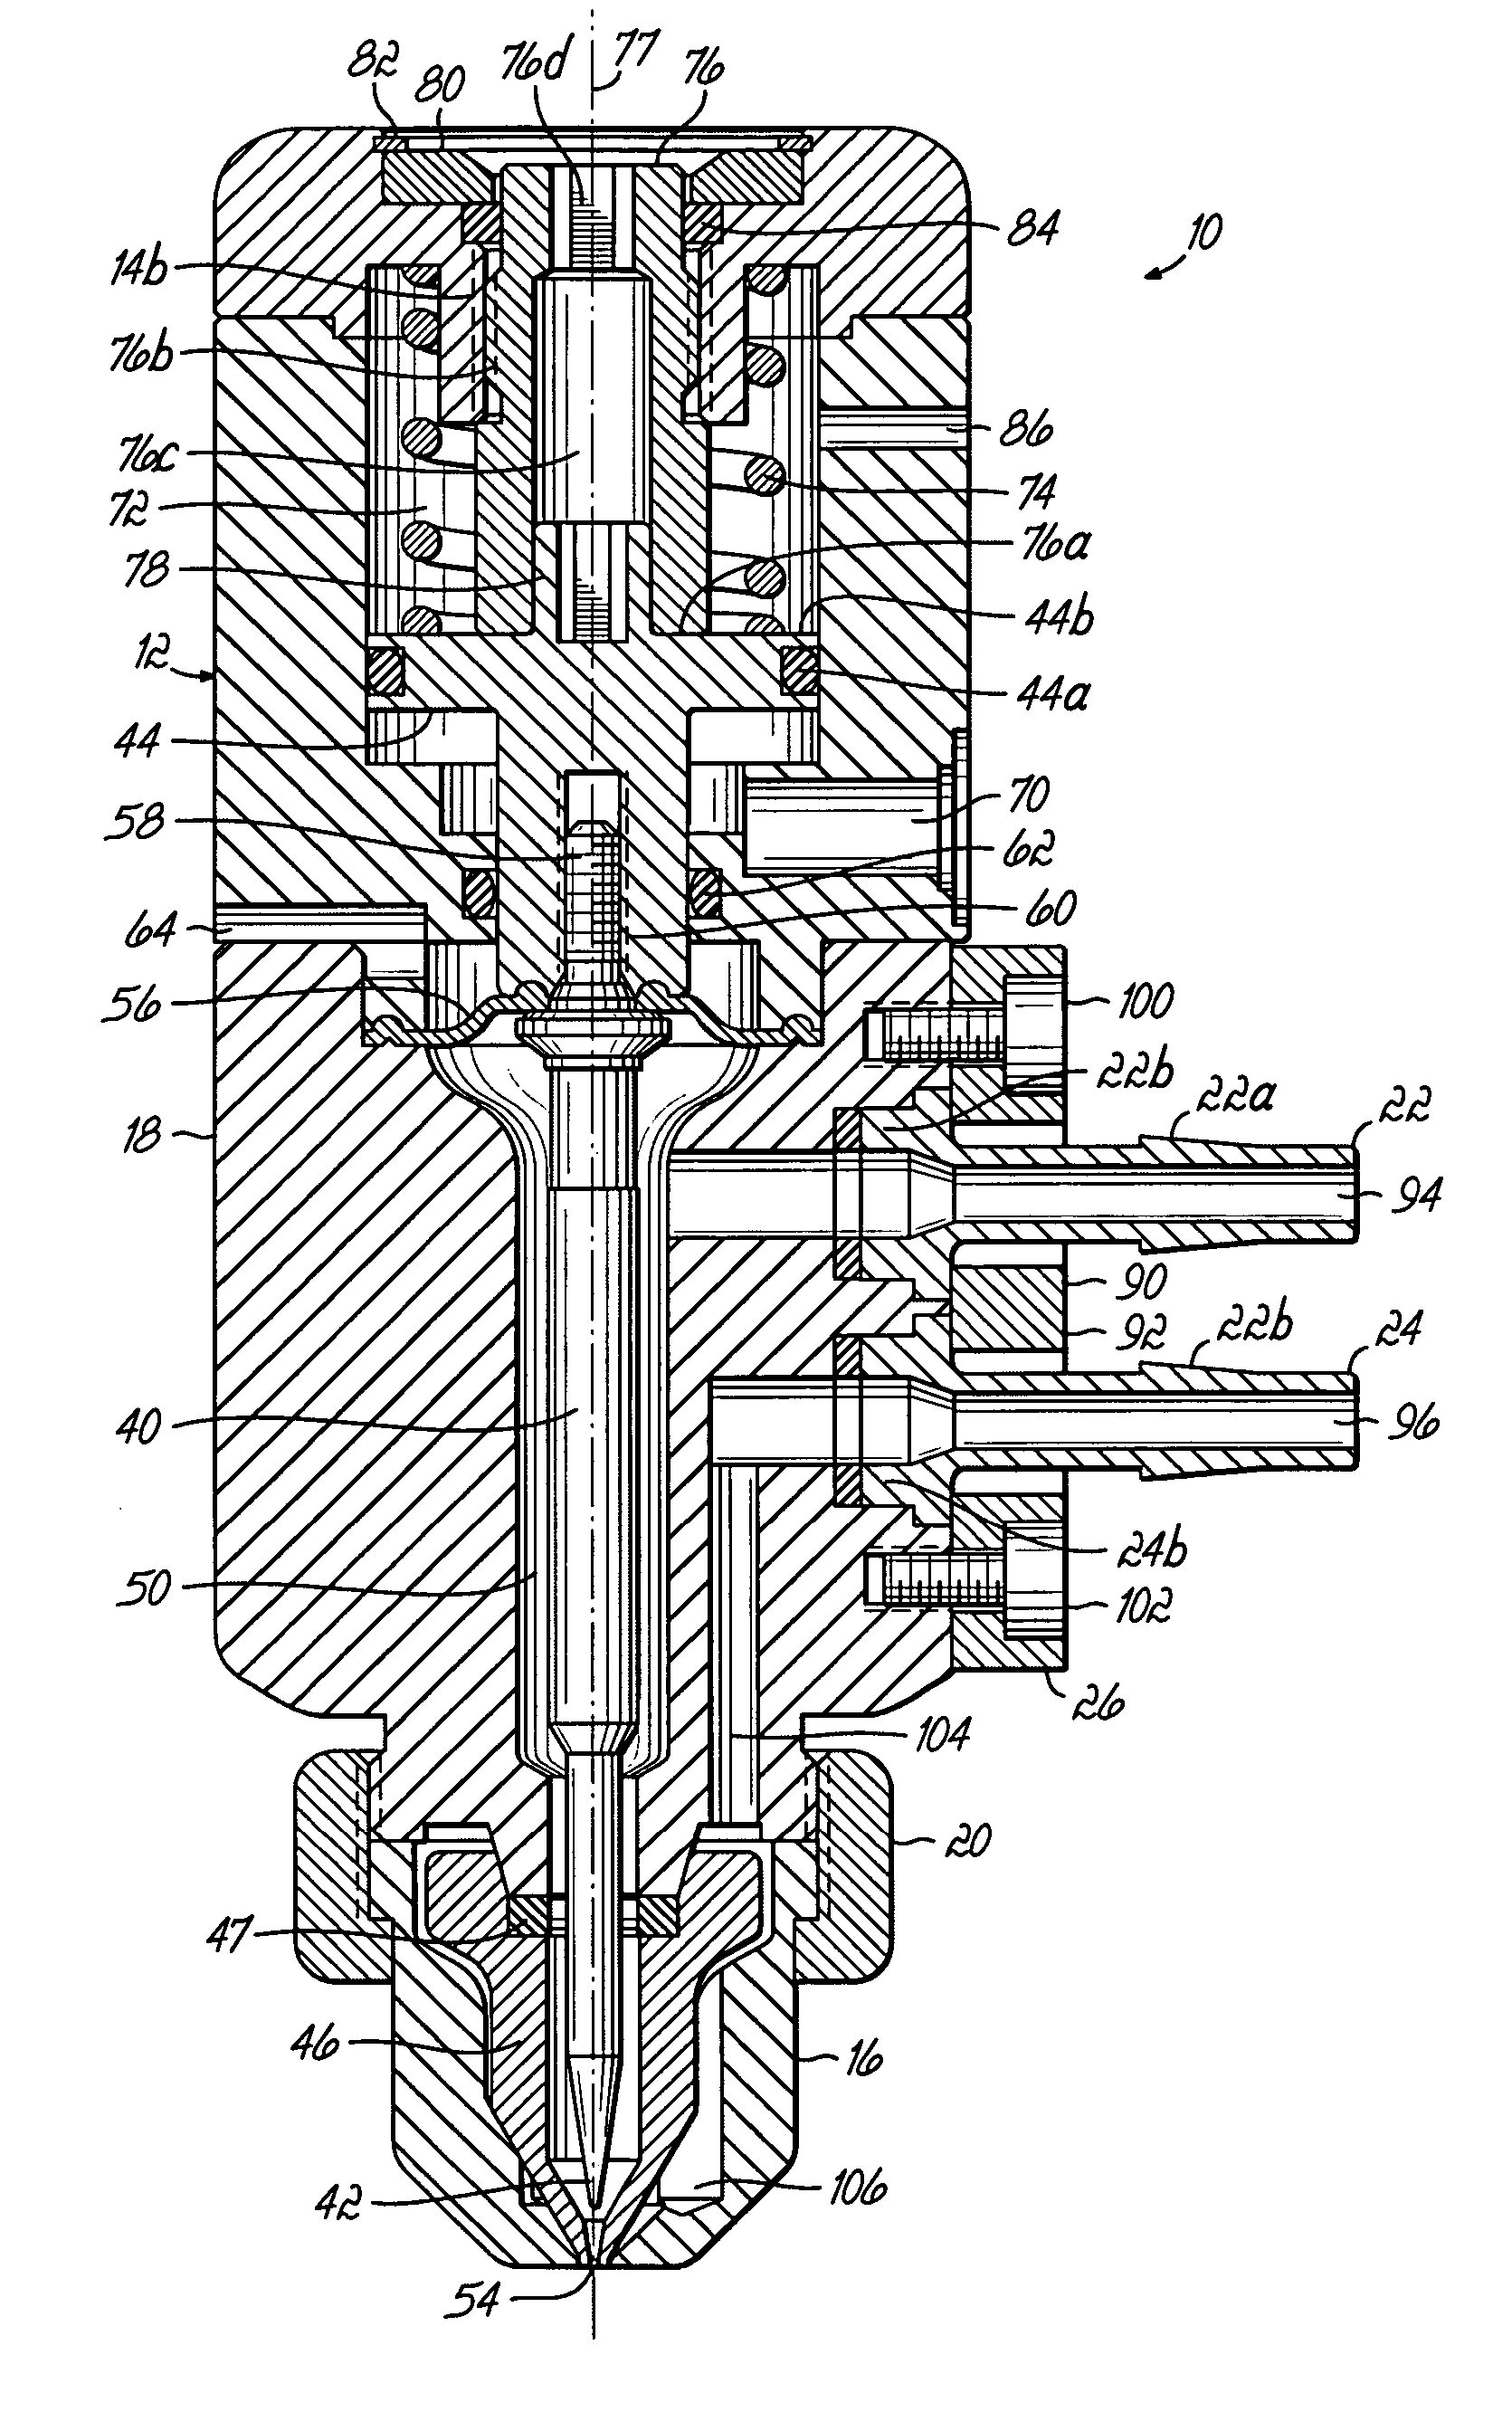 Liquid dispensing valve and method with improved stroke length calibration and fluid fittings